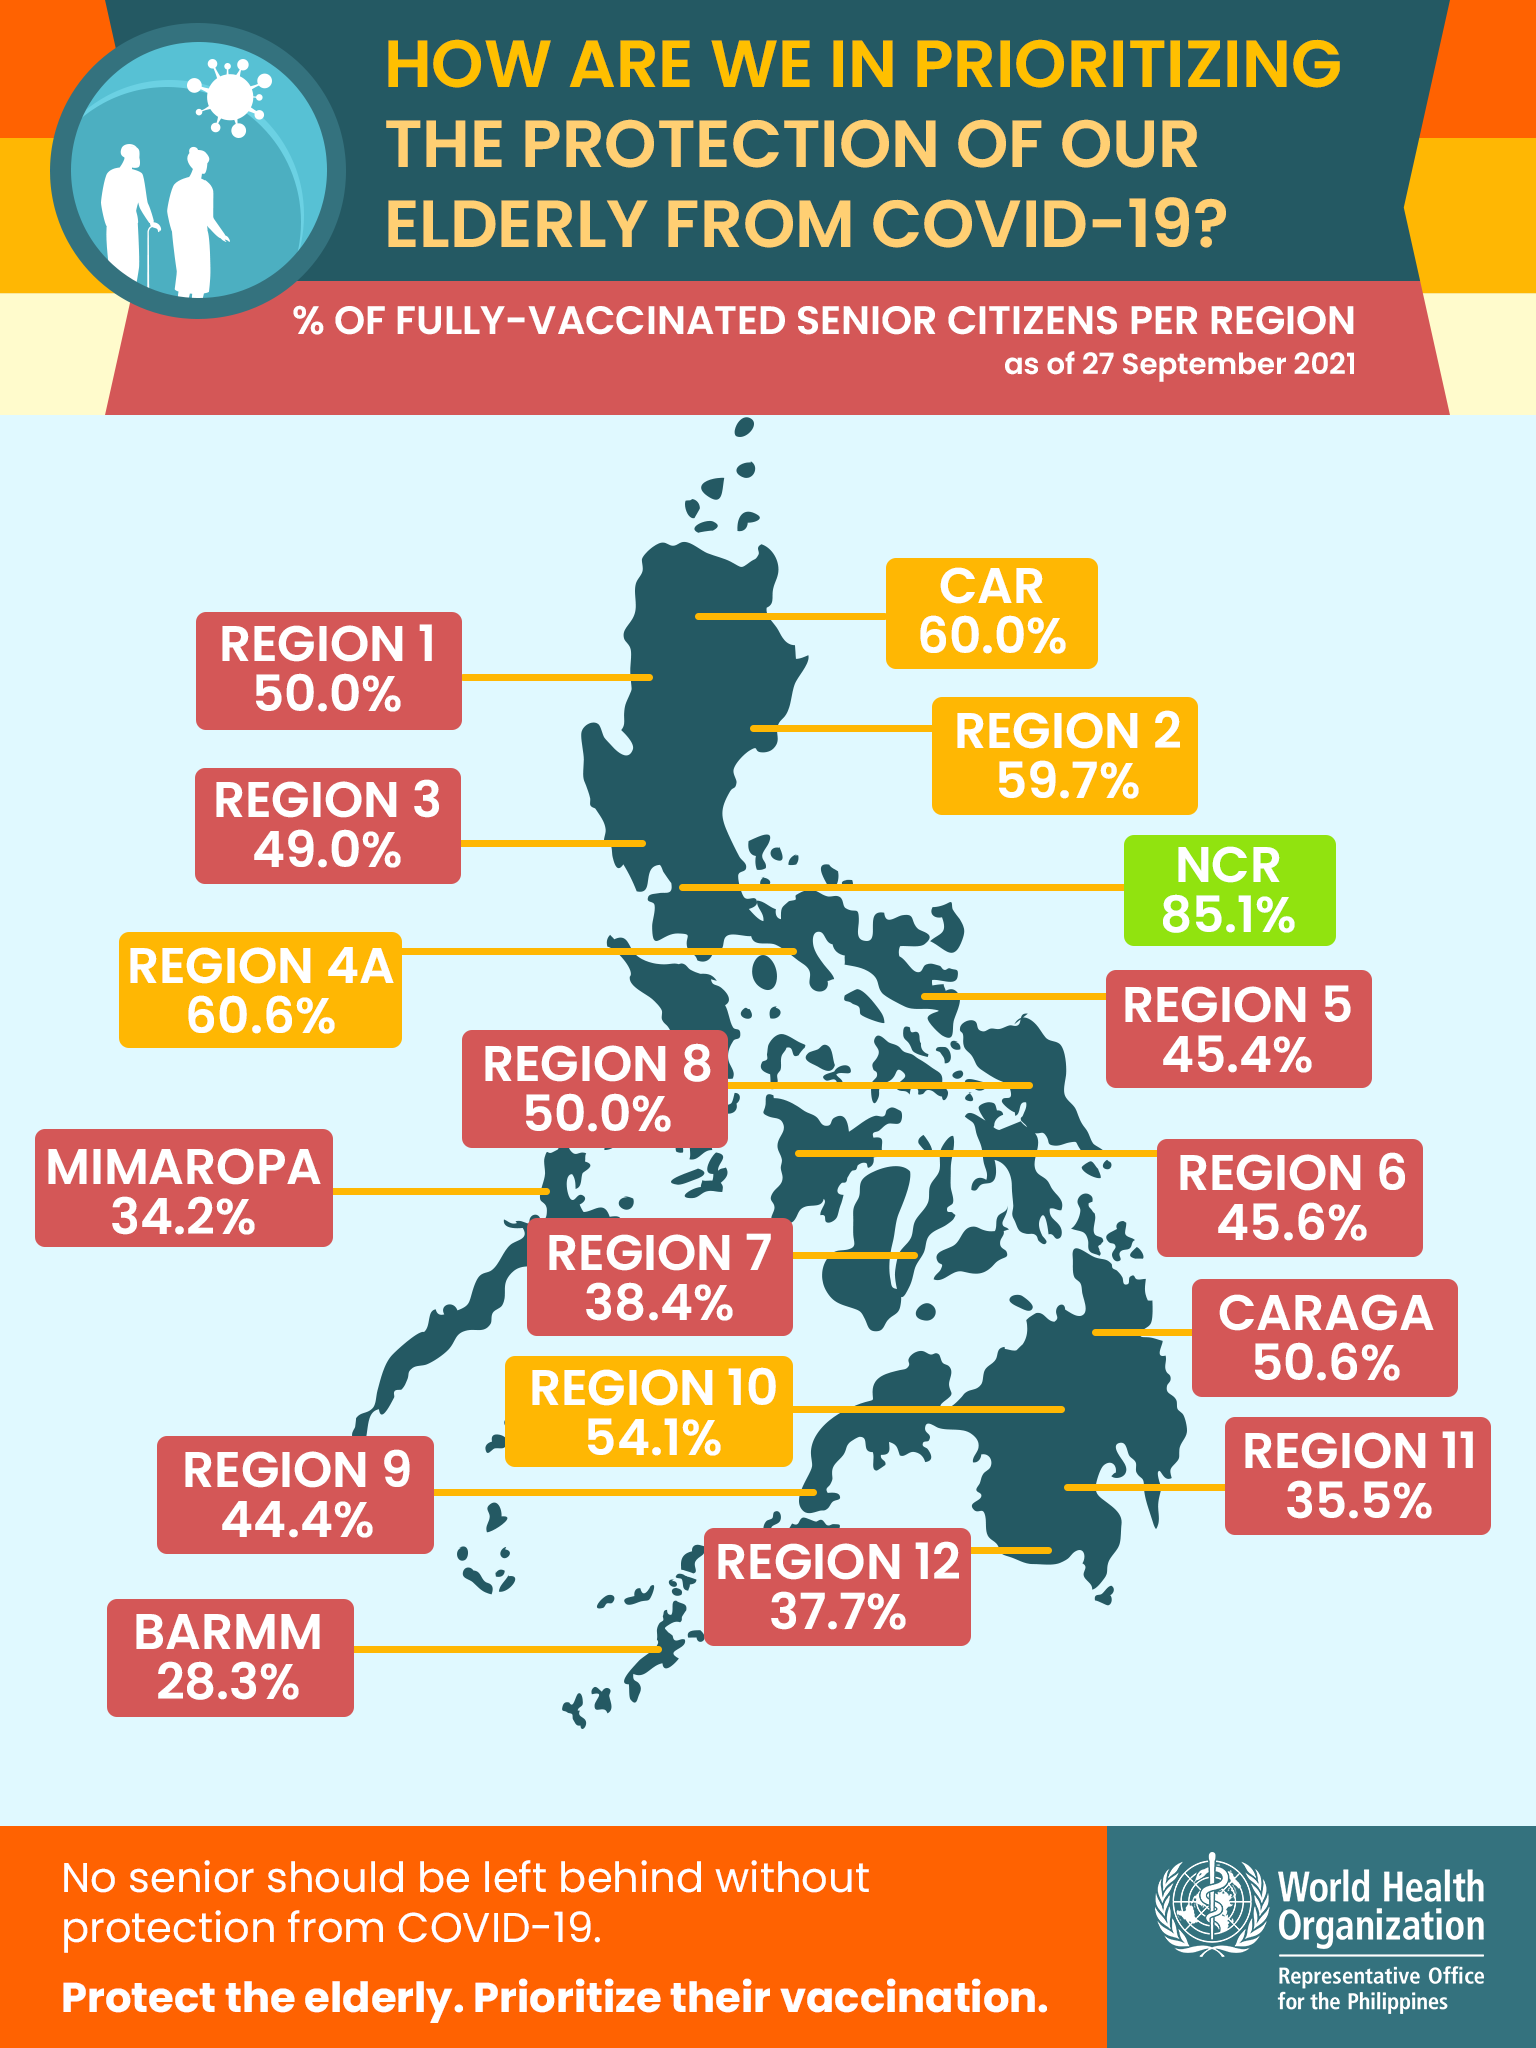 Vaccinated elderly in the Philippines